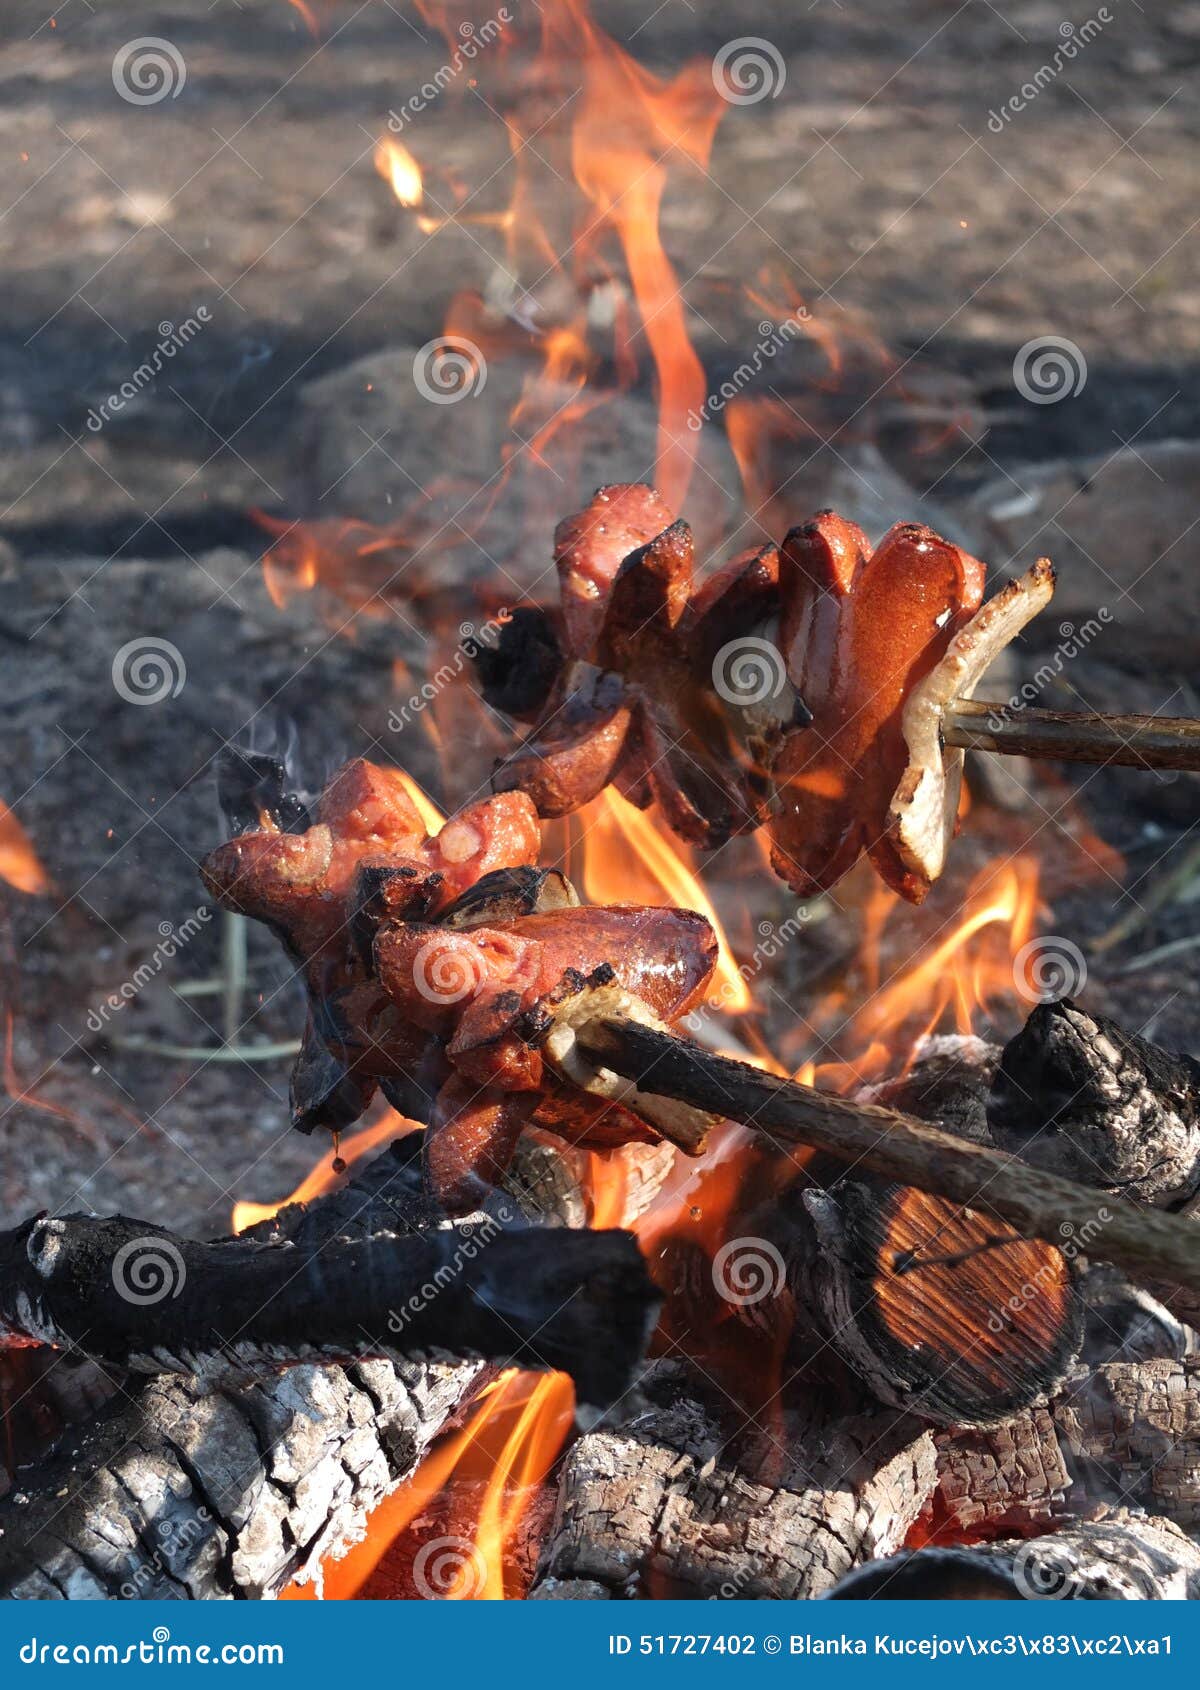 Roast Sausages Over a Fire in the Wild. Stock Photo - Image of roast ...